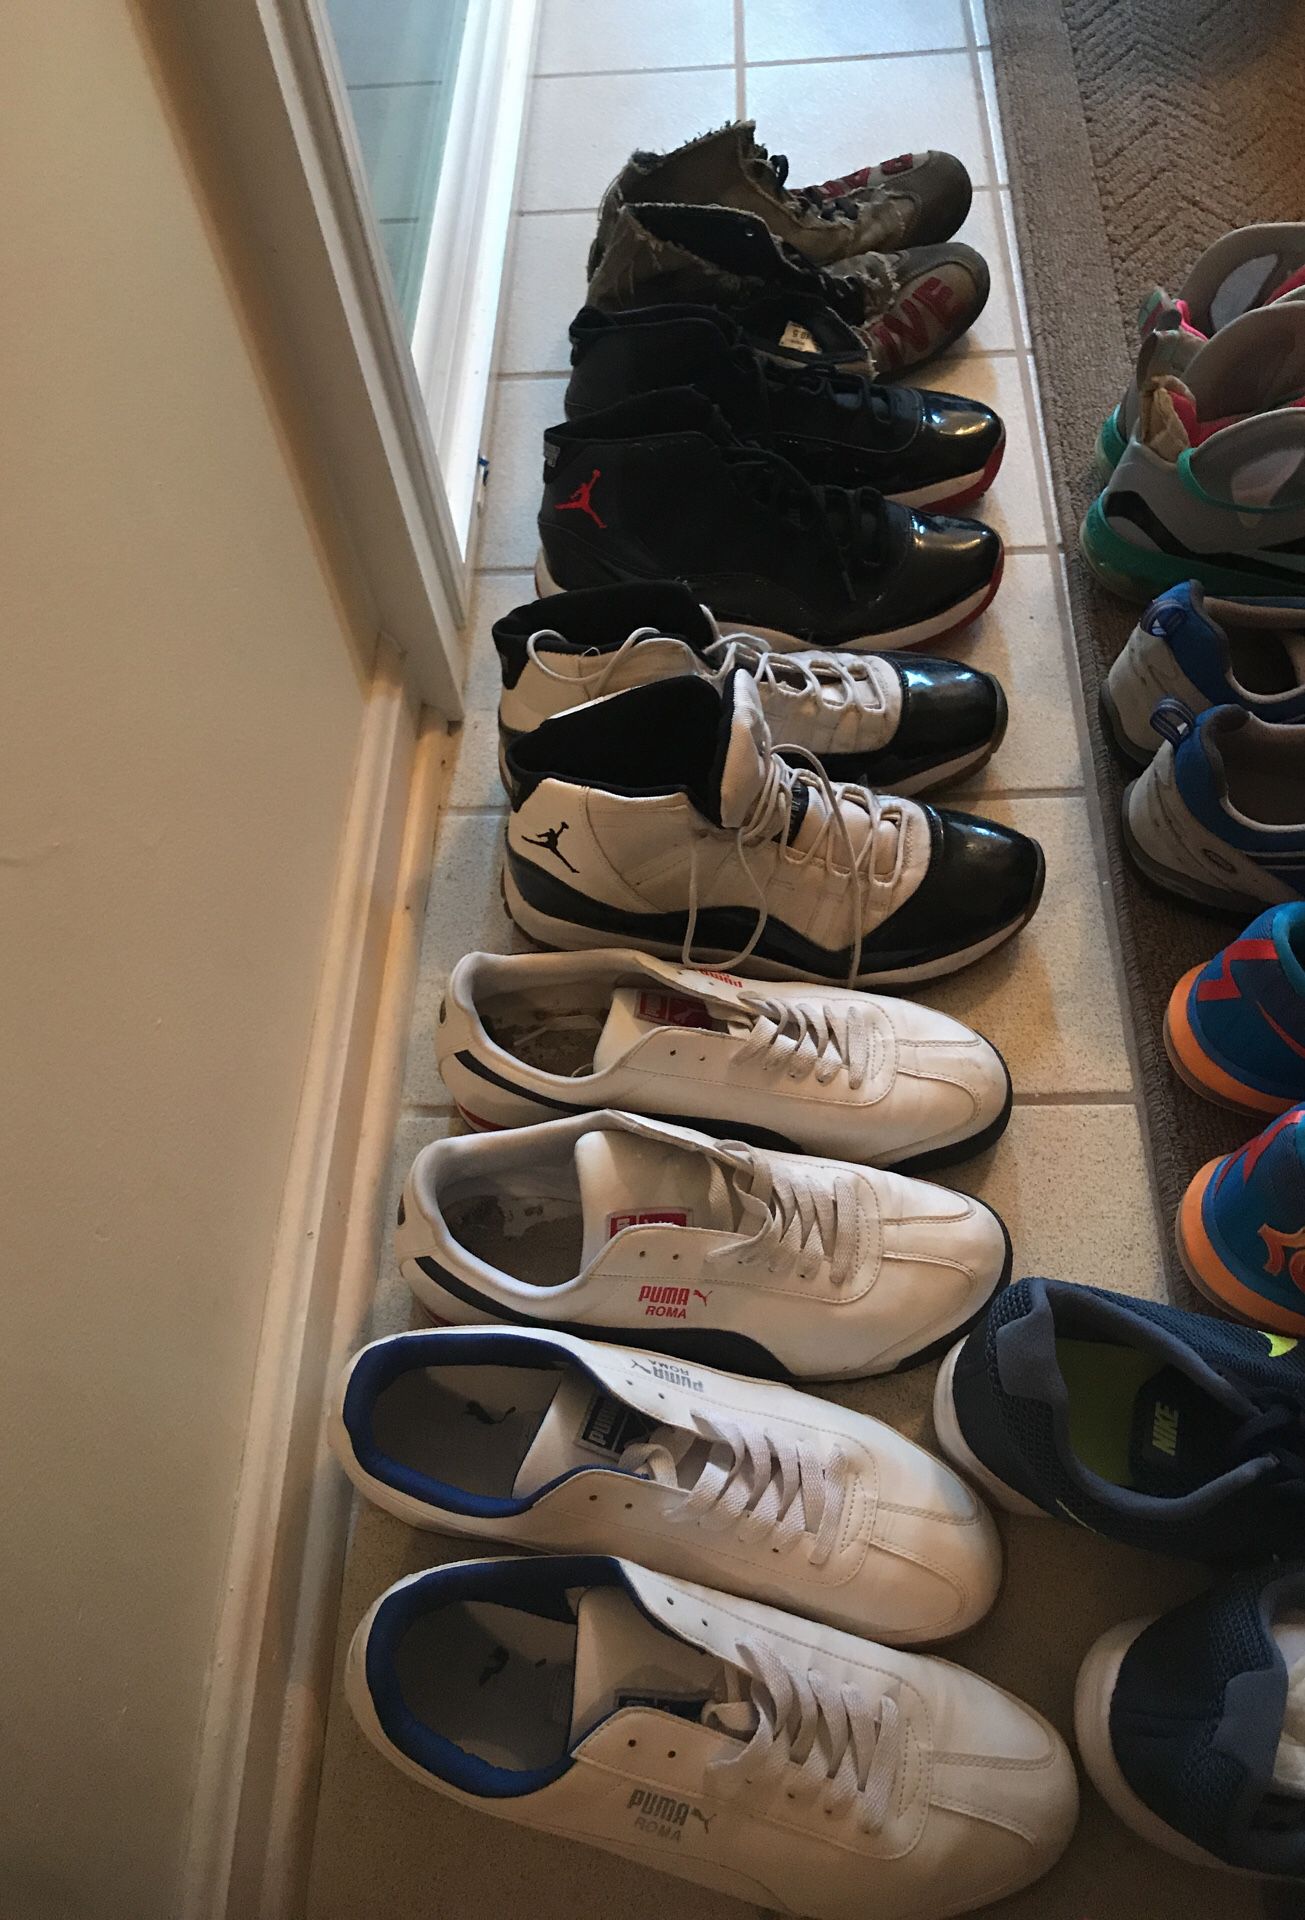 All the shoes size 10.5 /11